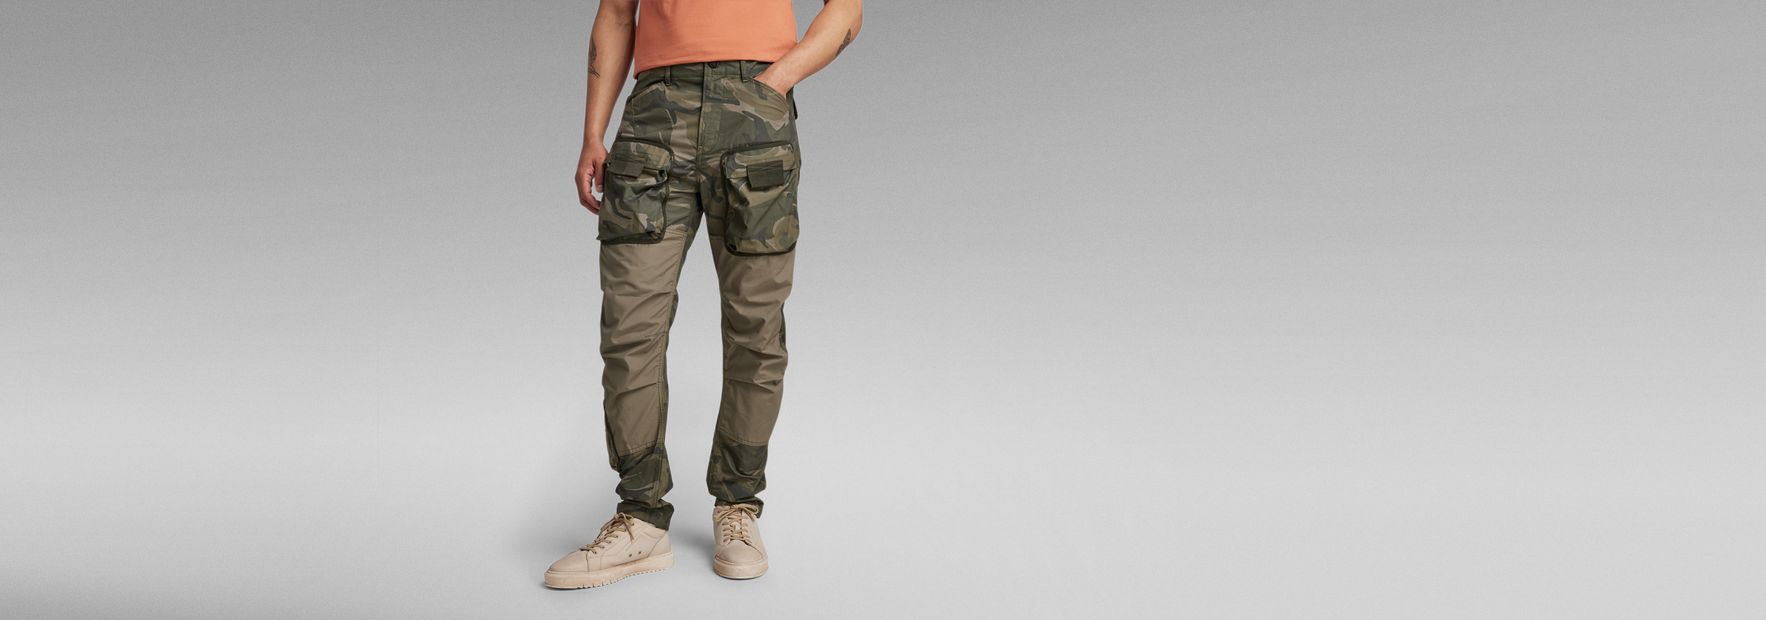 Exclusives by G-Star RAW - E Relaxed Tapered Cargo Pants | Styled after a  military helicopter pant with multiple “3D” pockets. The Exclusives  collection is now available online, exclusively in our official